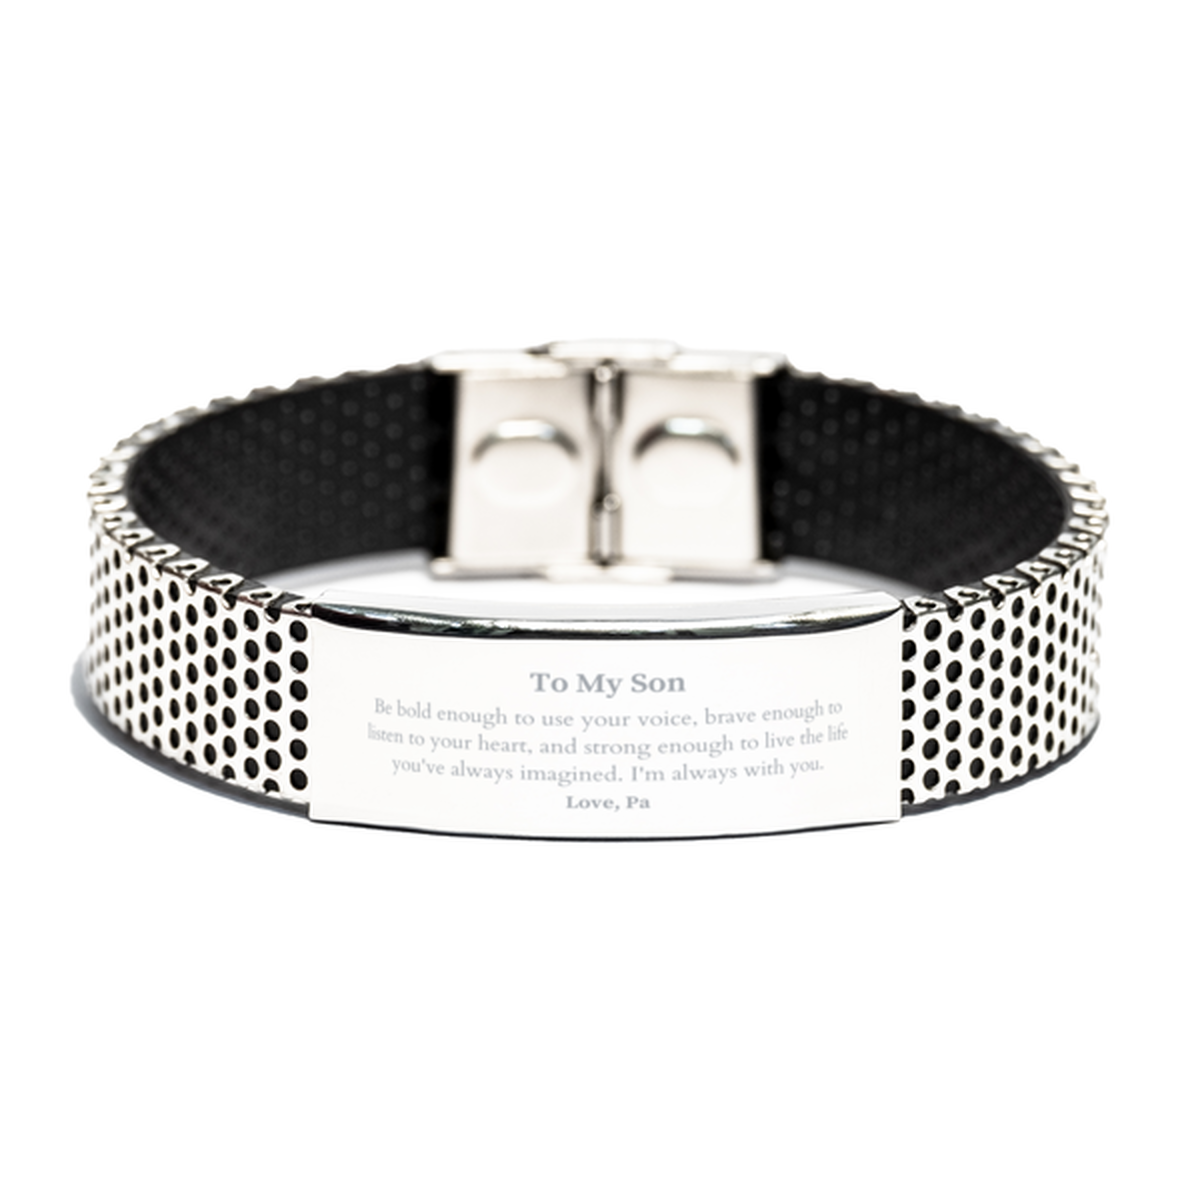 Keepsake Son Stainless Steel Bracelet Gift Idea Graduation Christmas Birthday Son from Pa, Son Be bold enough to use your voice, brave enough to listen to your heart. Love, Pa